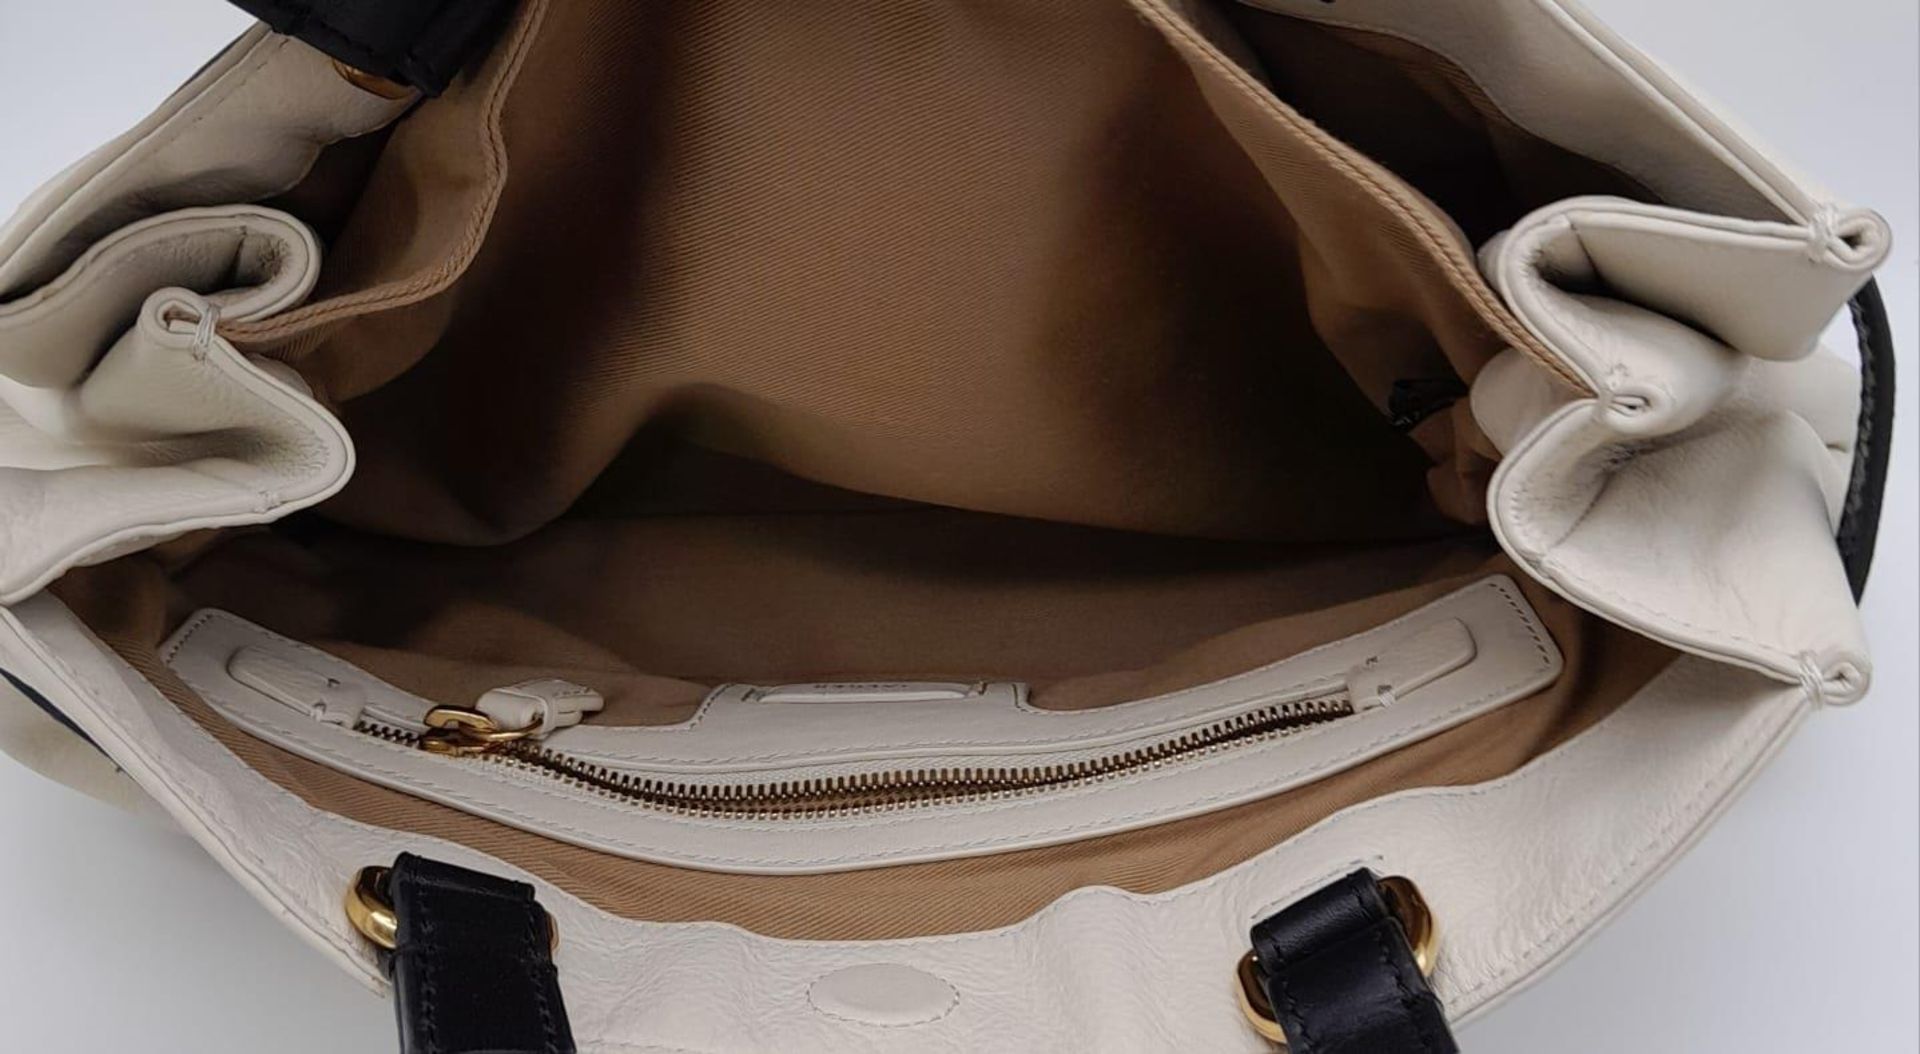 A Jaeger White Leather Handbag. White leather exterior with black leather belt closure and - Image 7 of 8